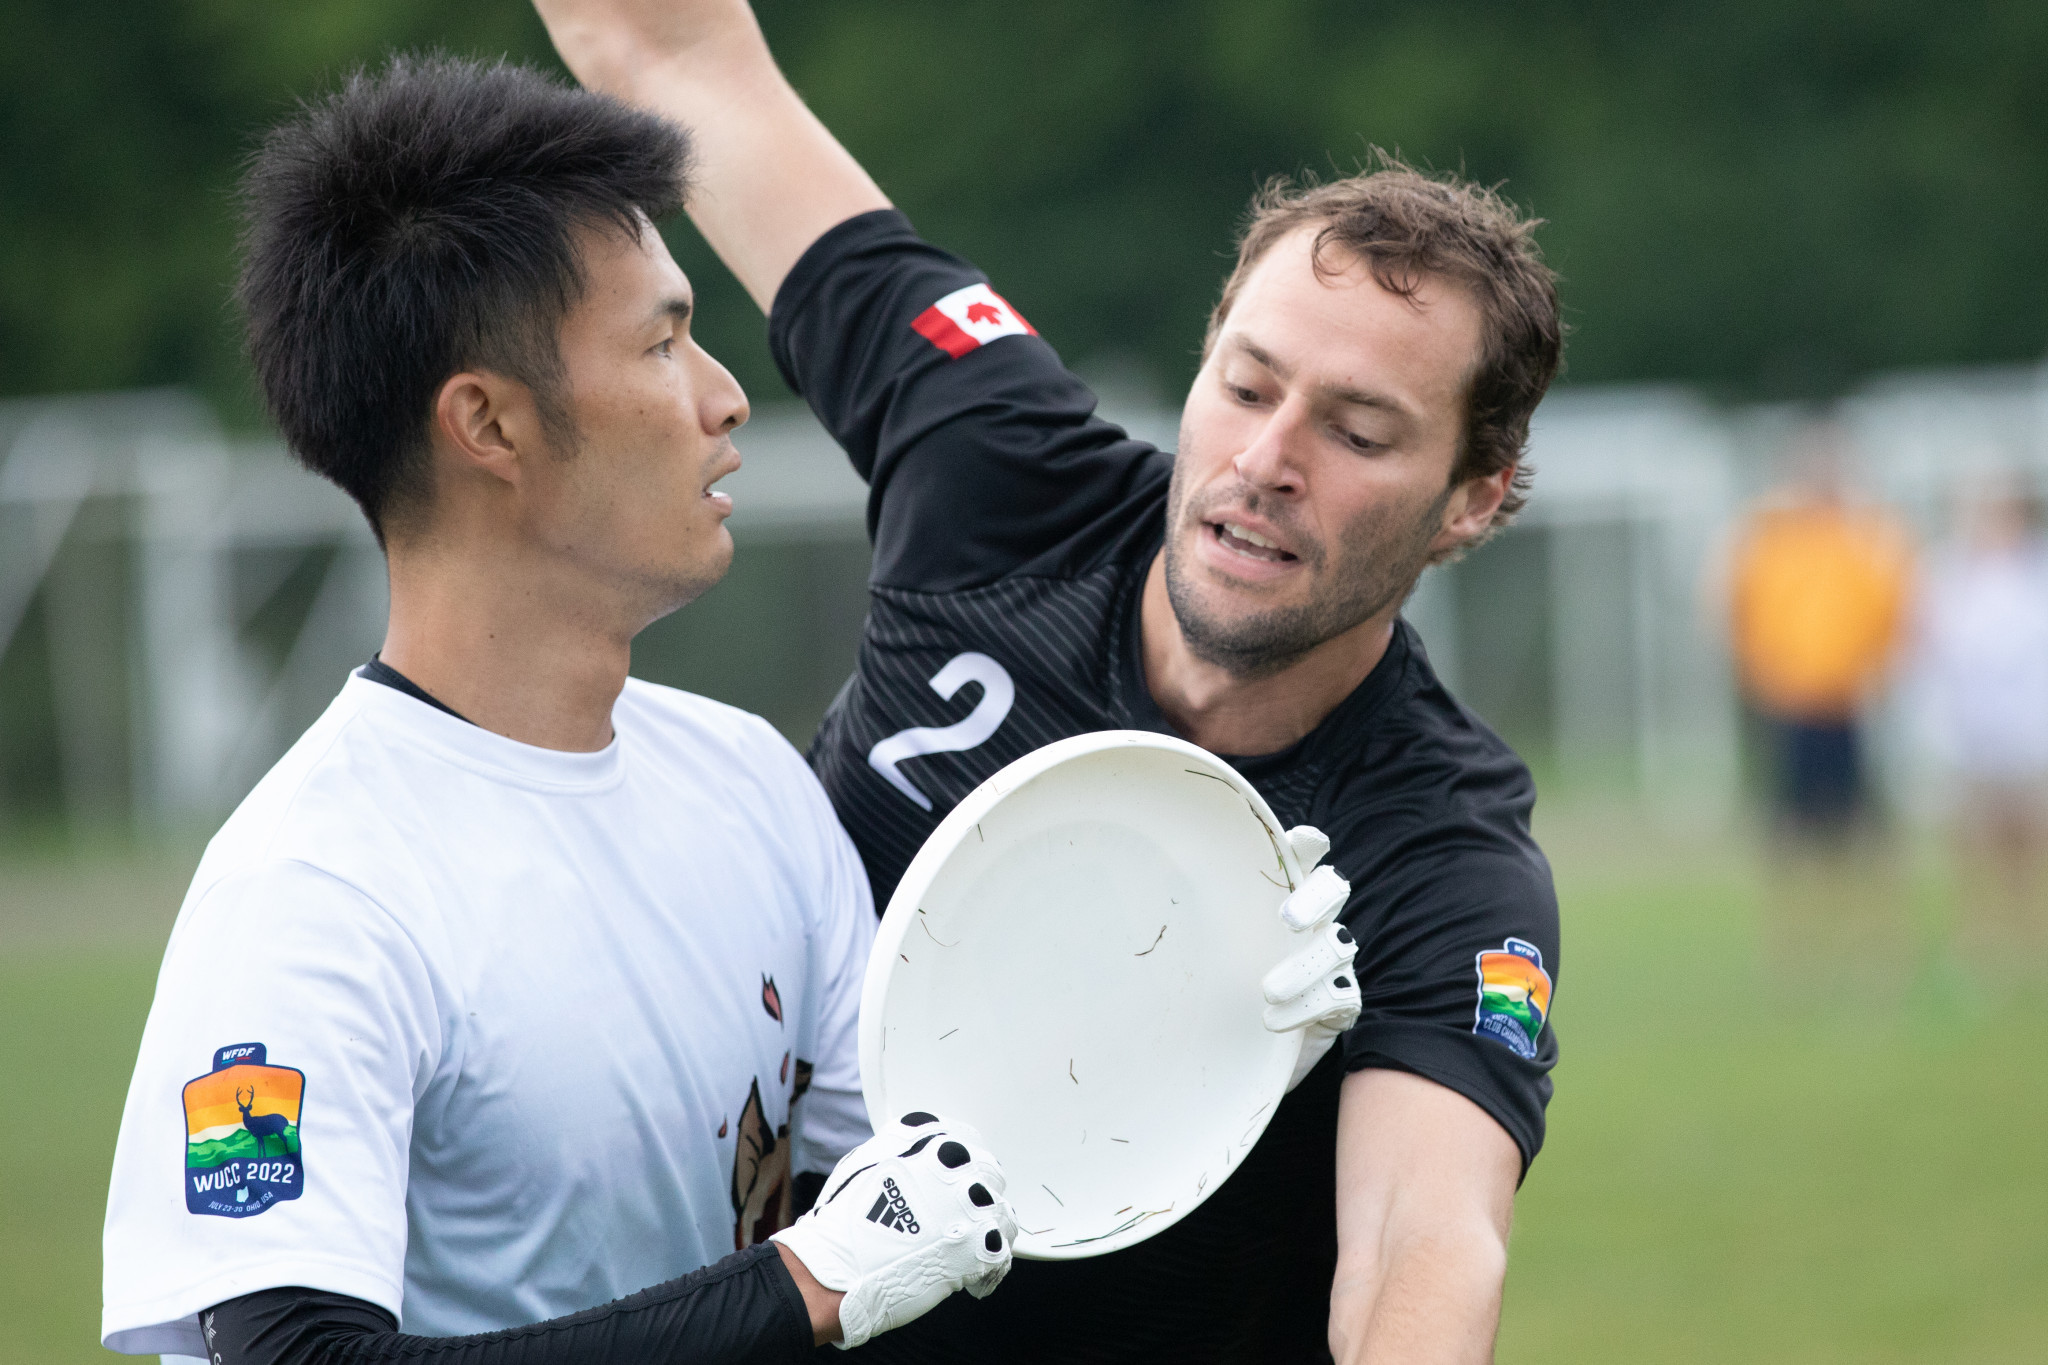 Vincent Gamache and LAB were unable to follow up their win over CRAZY with another against Pussin Tiristäjät ©Marshall Lian for UltiPhotos